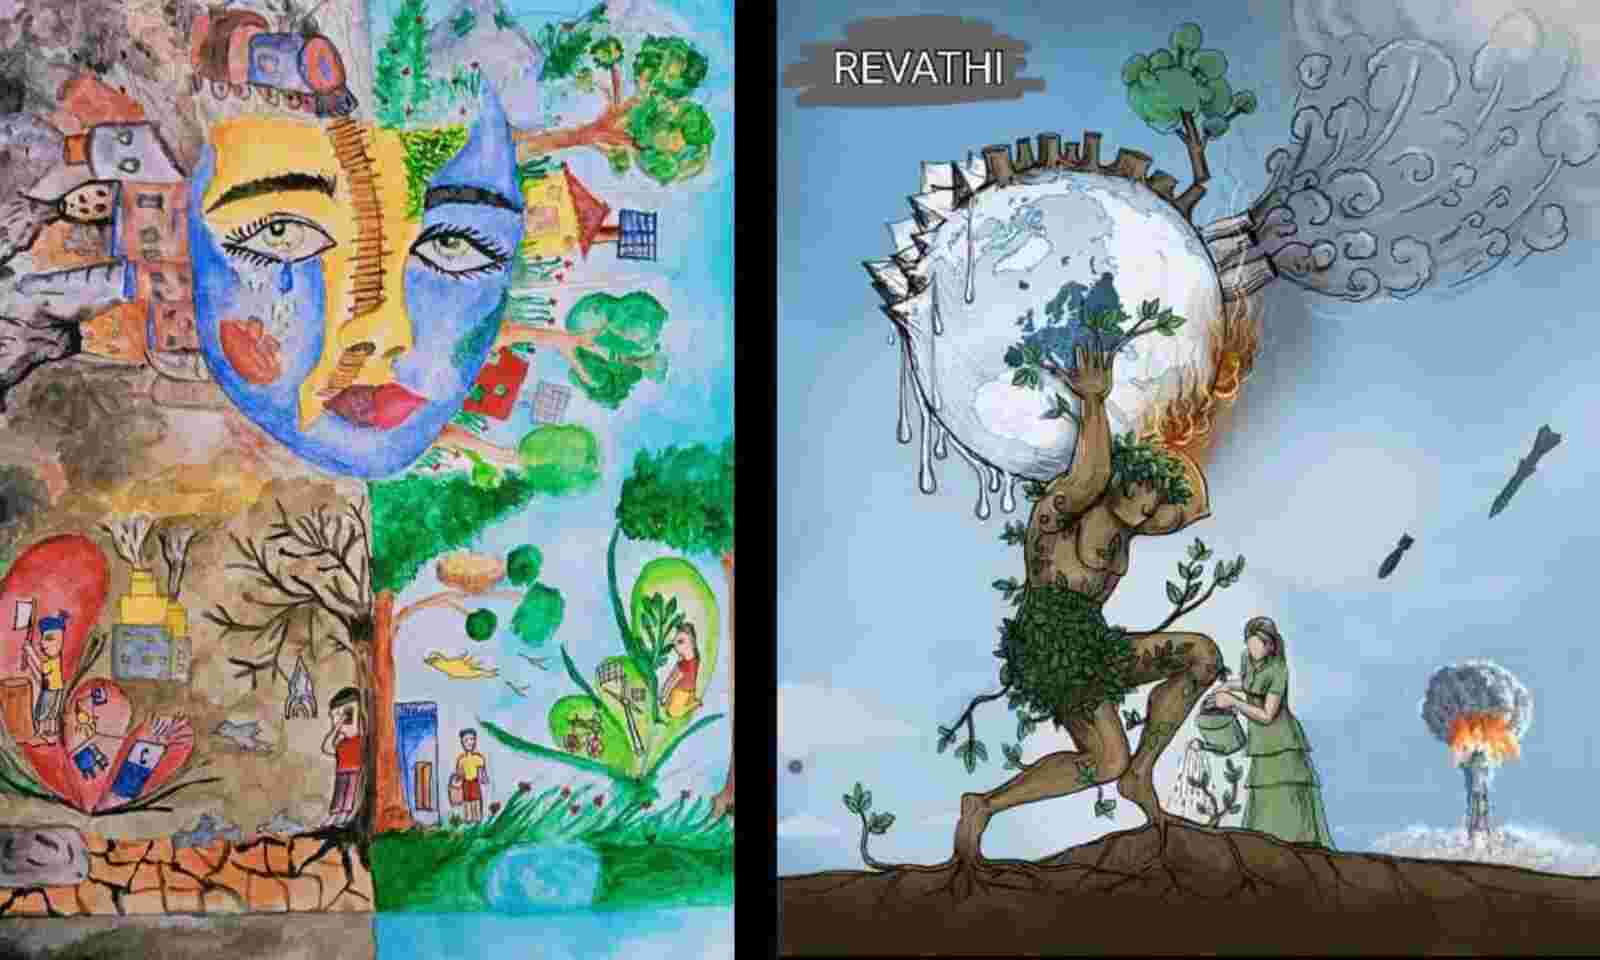 Earth Day poster.Earth day poster drawing for competition.Lifestyle for environment  drawing/painting - YouTube